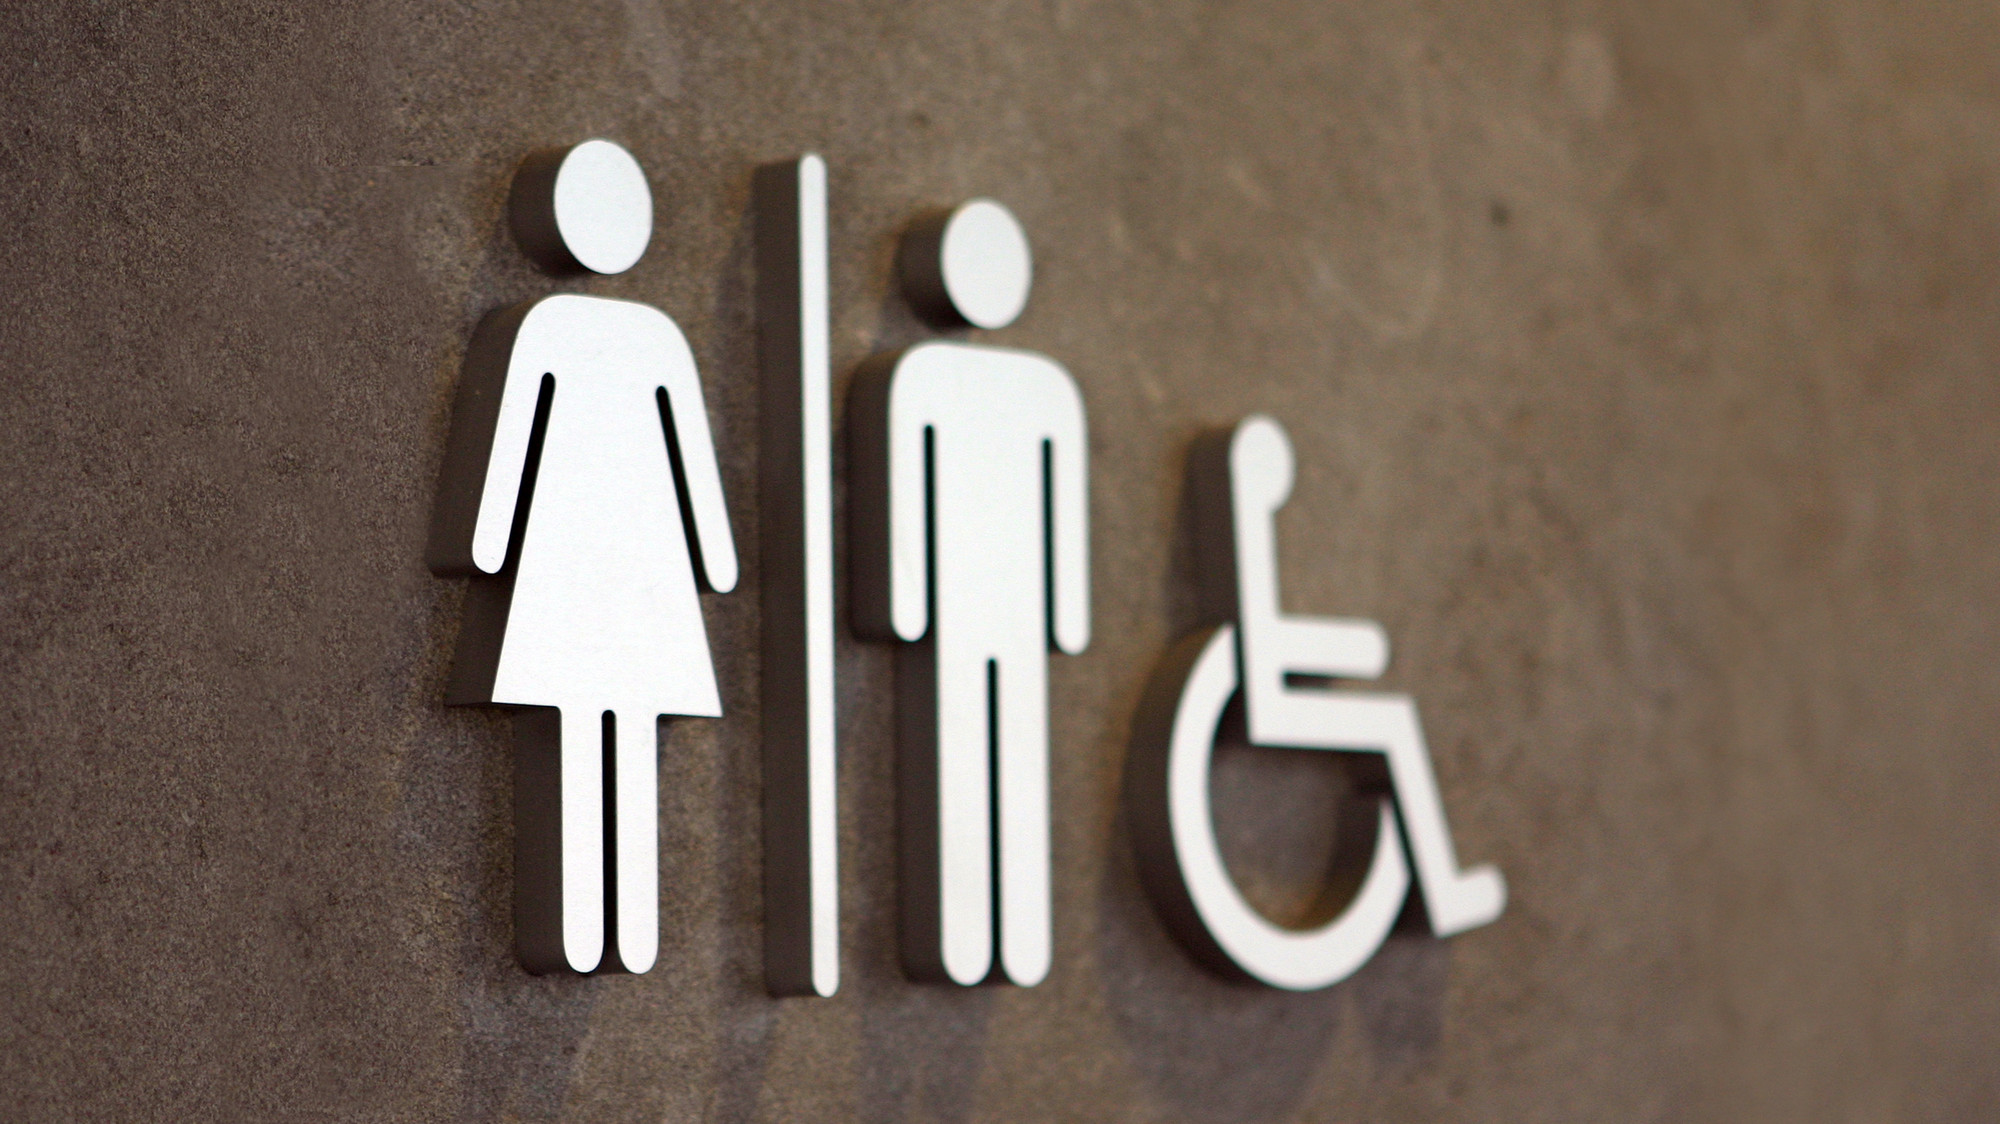 Accessible sanitary rooms